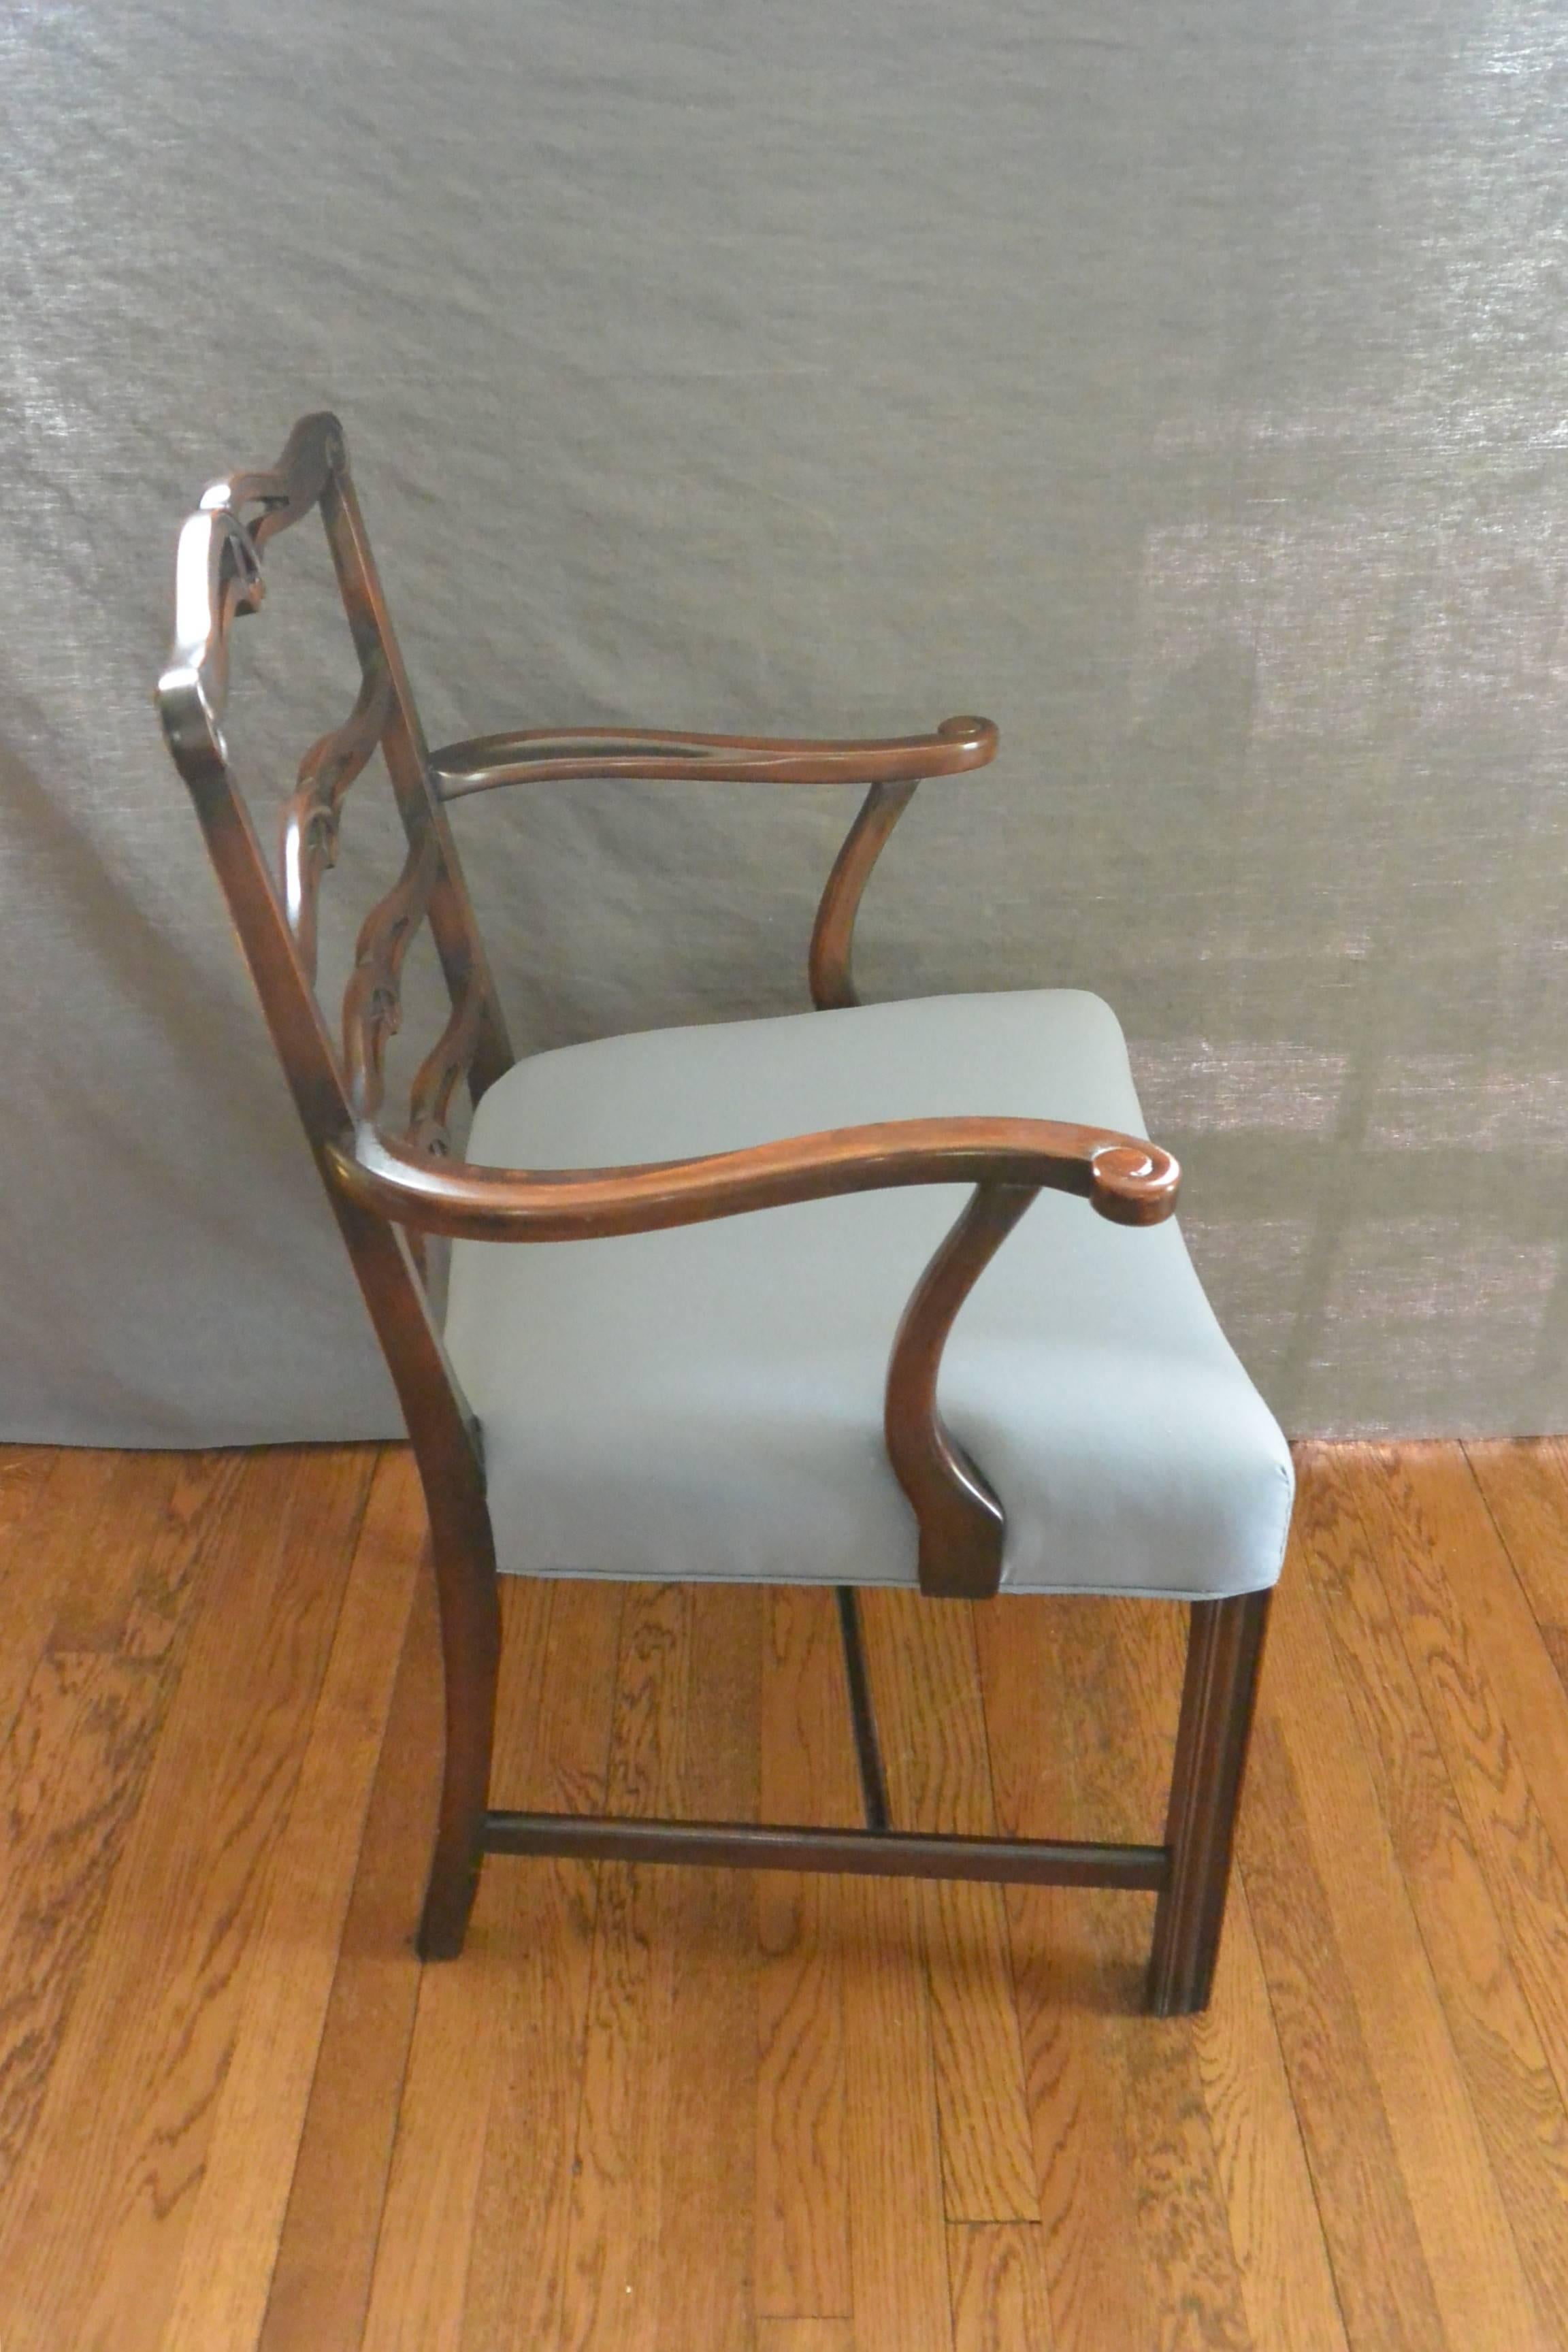 George III Style Ladderback Armchair In Excellent Condition For Sale In New York, NY